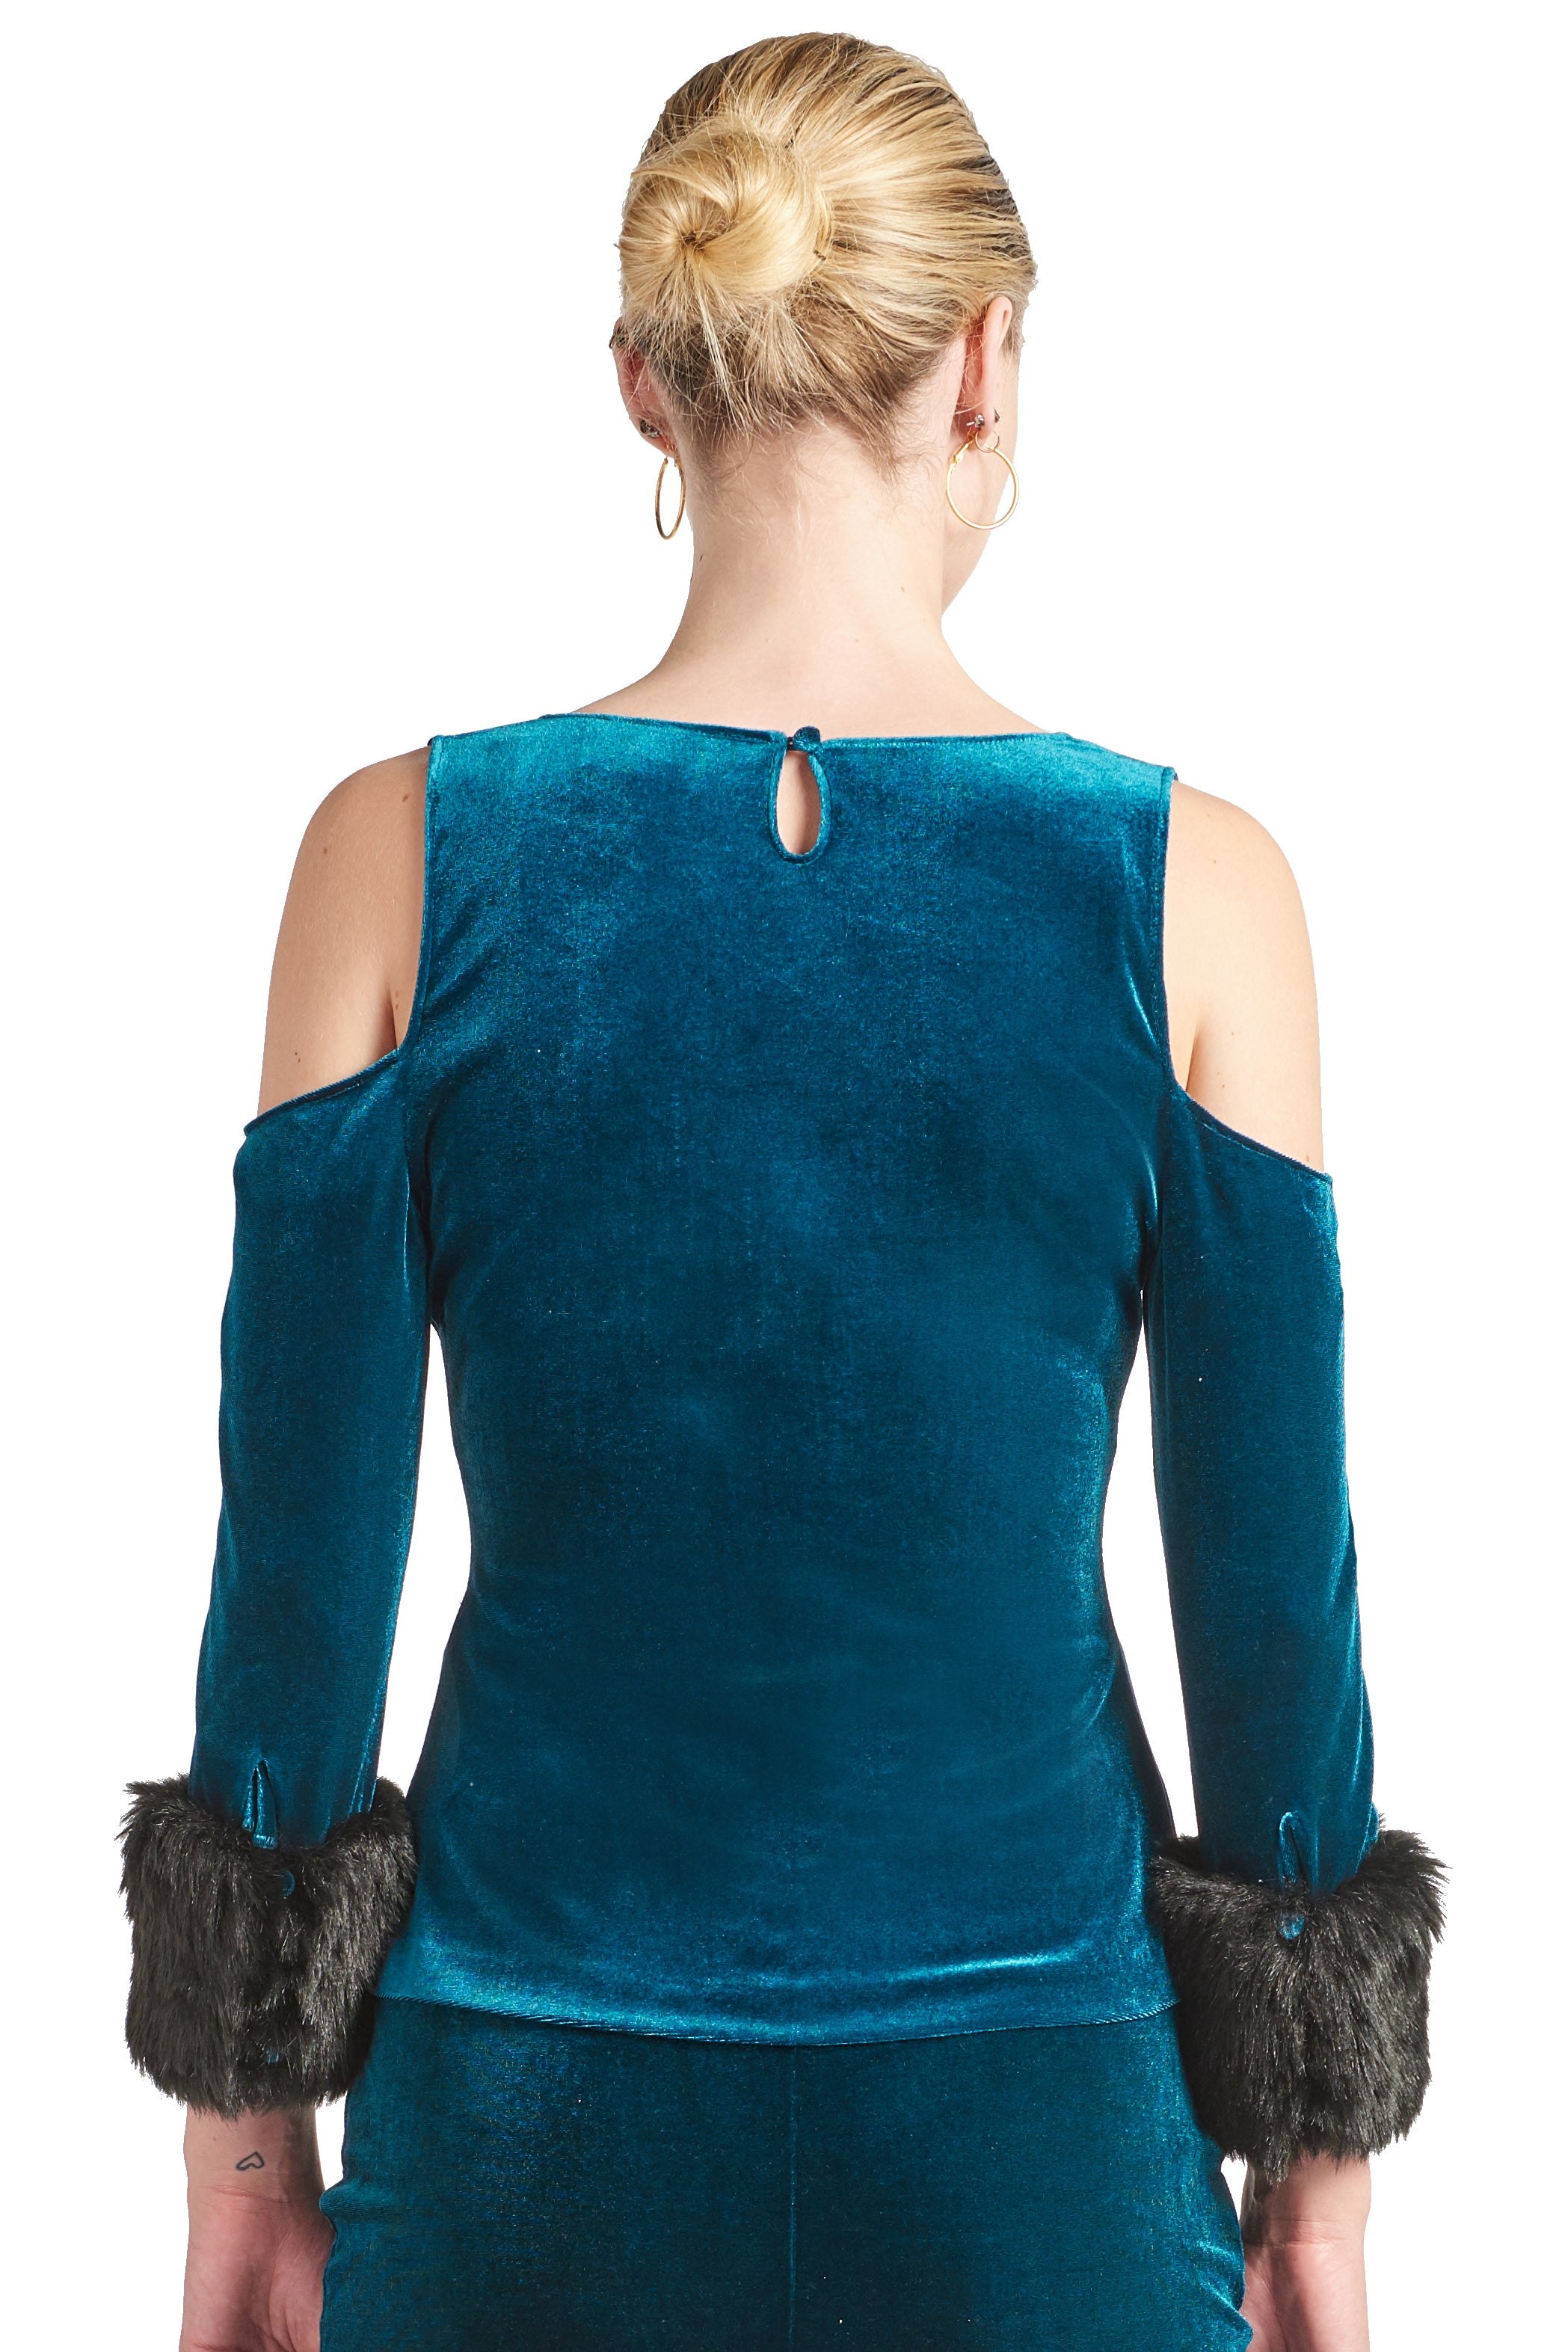 Back view of model wearing the Simona Maghen Mia Top, teal stretch velvet cut-out cold shoulder top with u-neckline, 3/4 sleeves and black faux fur cuffs.